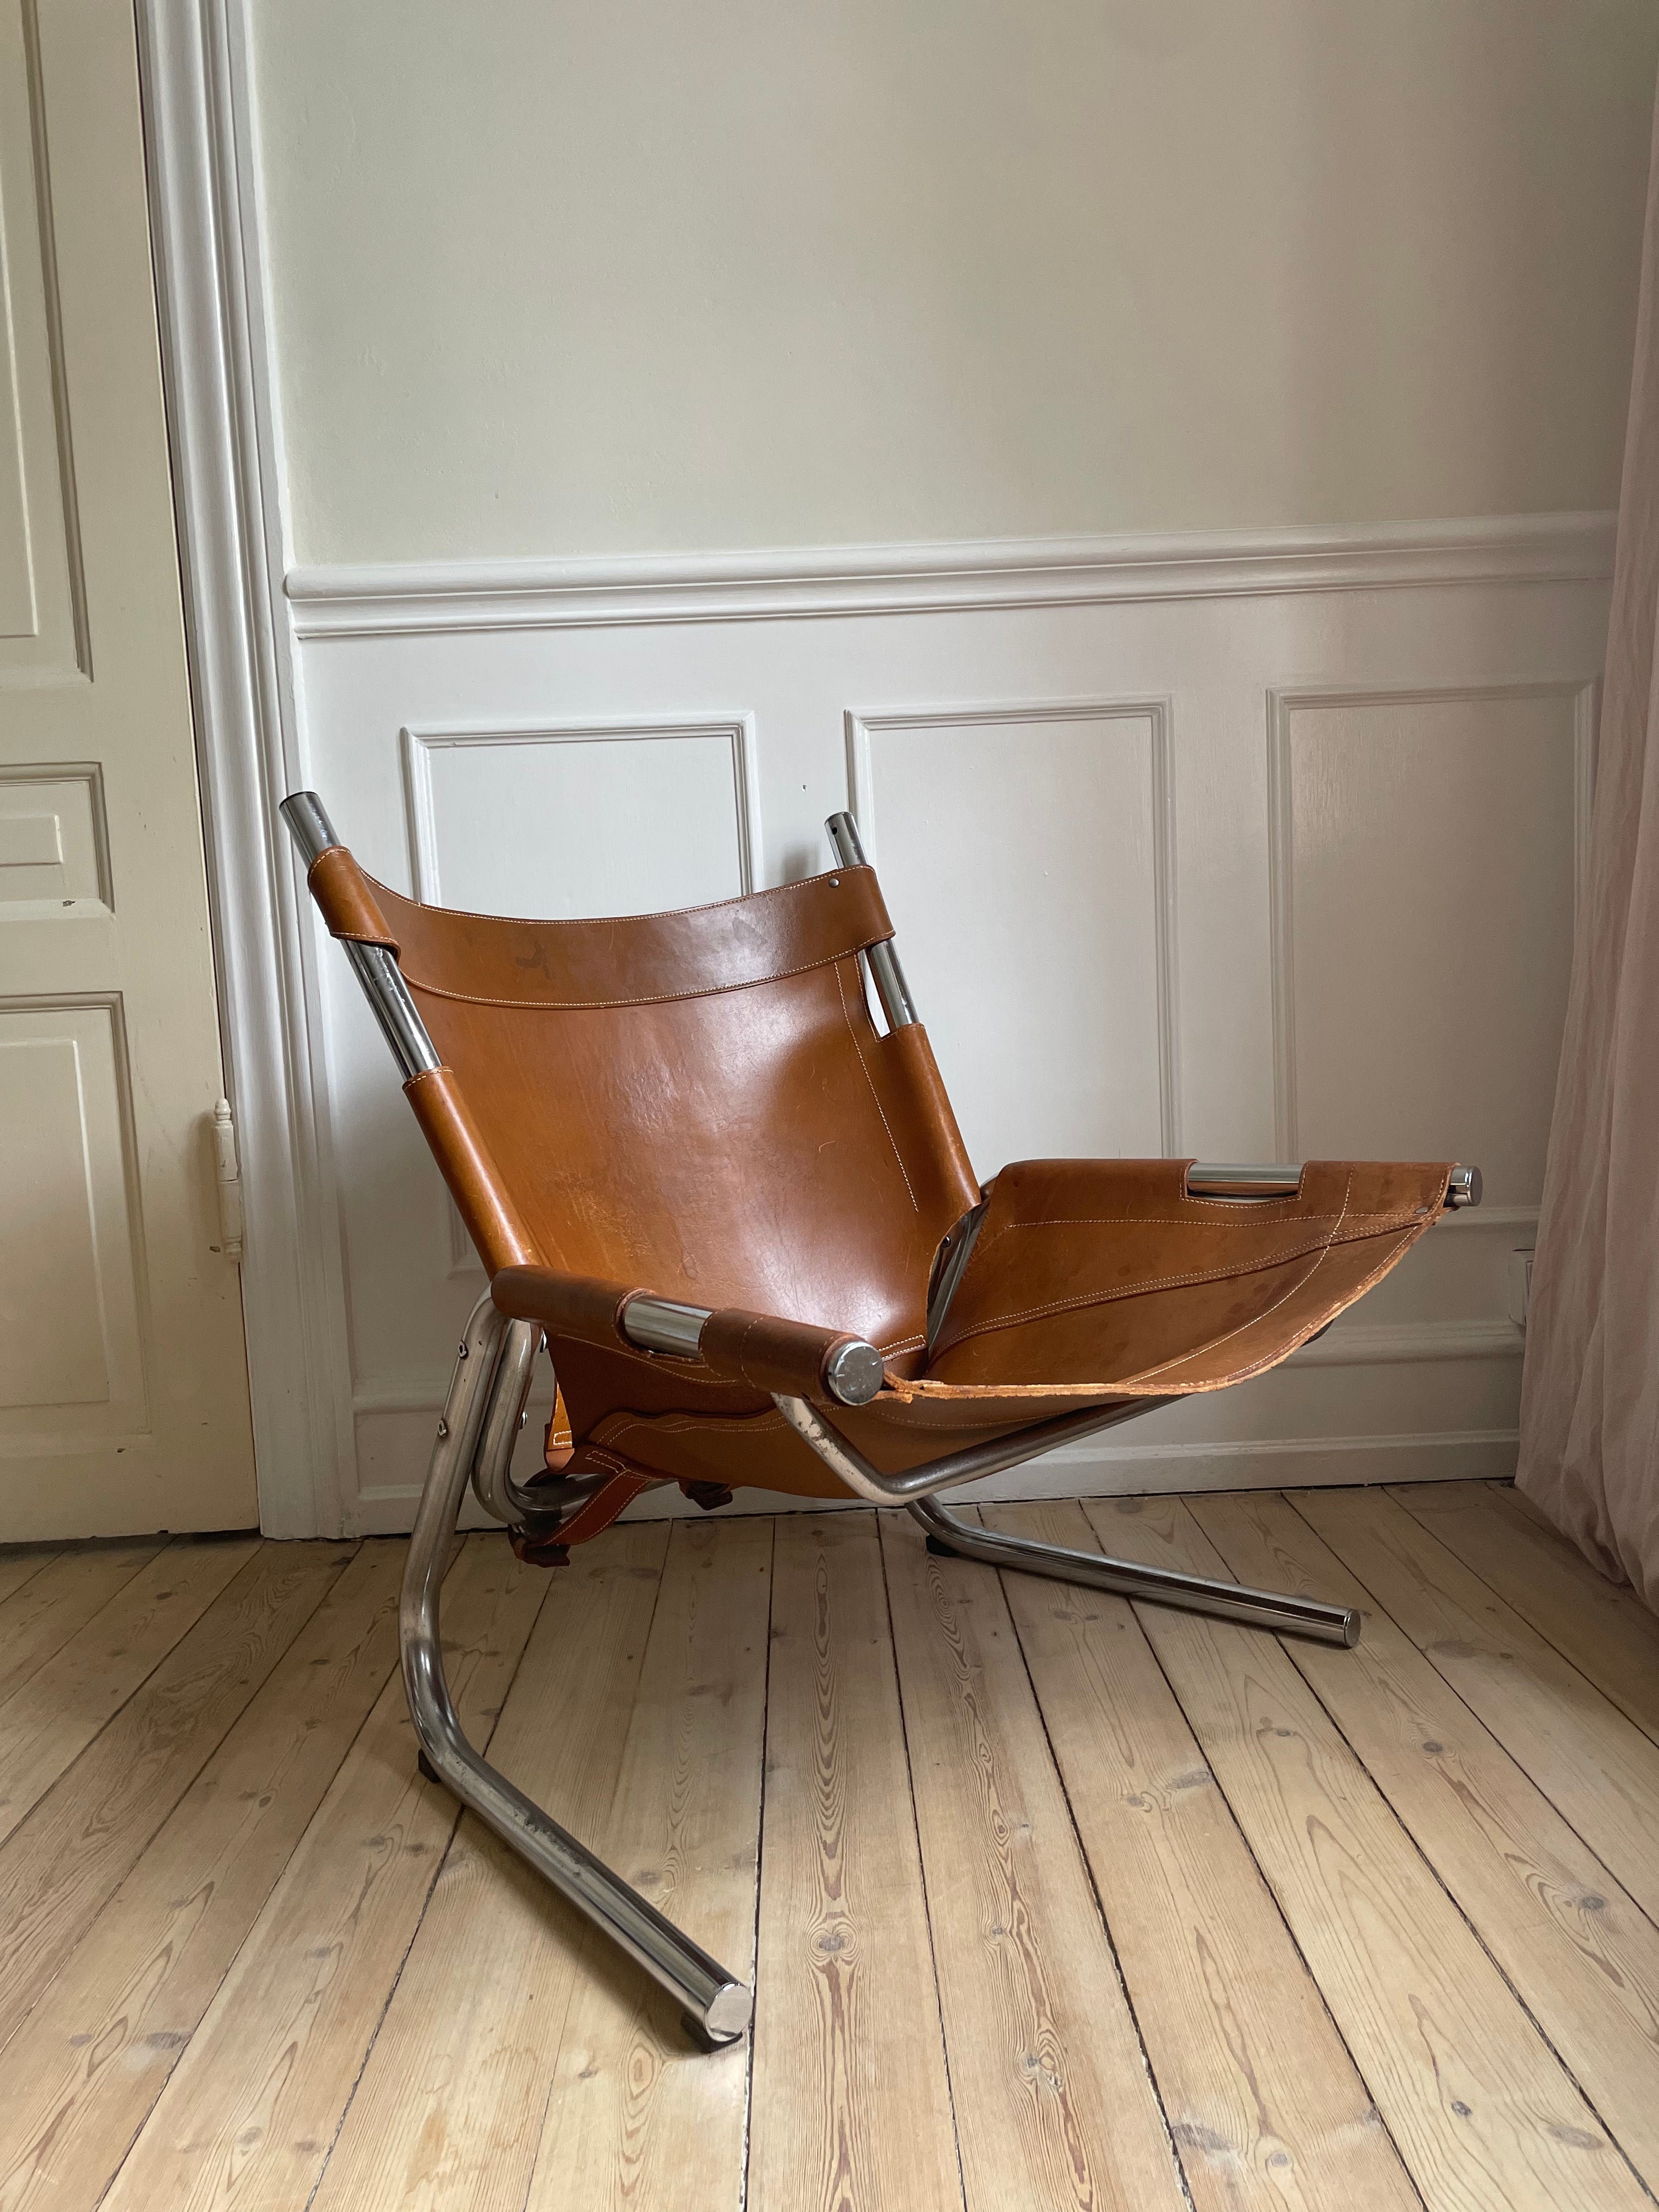 European midcentury modern leather sling lounge chair. Steel tube base with natural brown patinated cognac leather attached with metal buckle leather straps and light brown stitches. Scandinavian, Dutch or French design in the style of Pierre